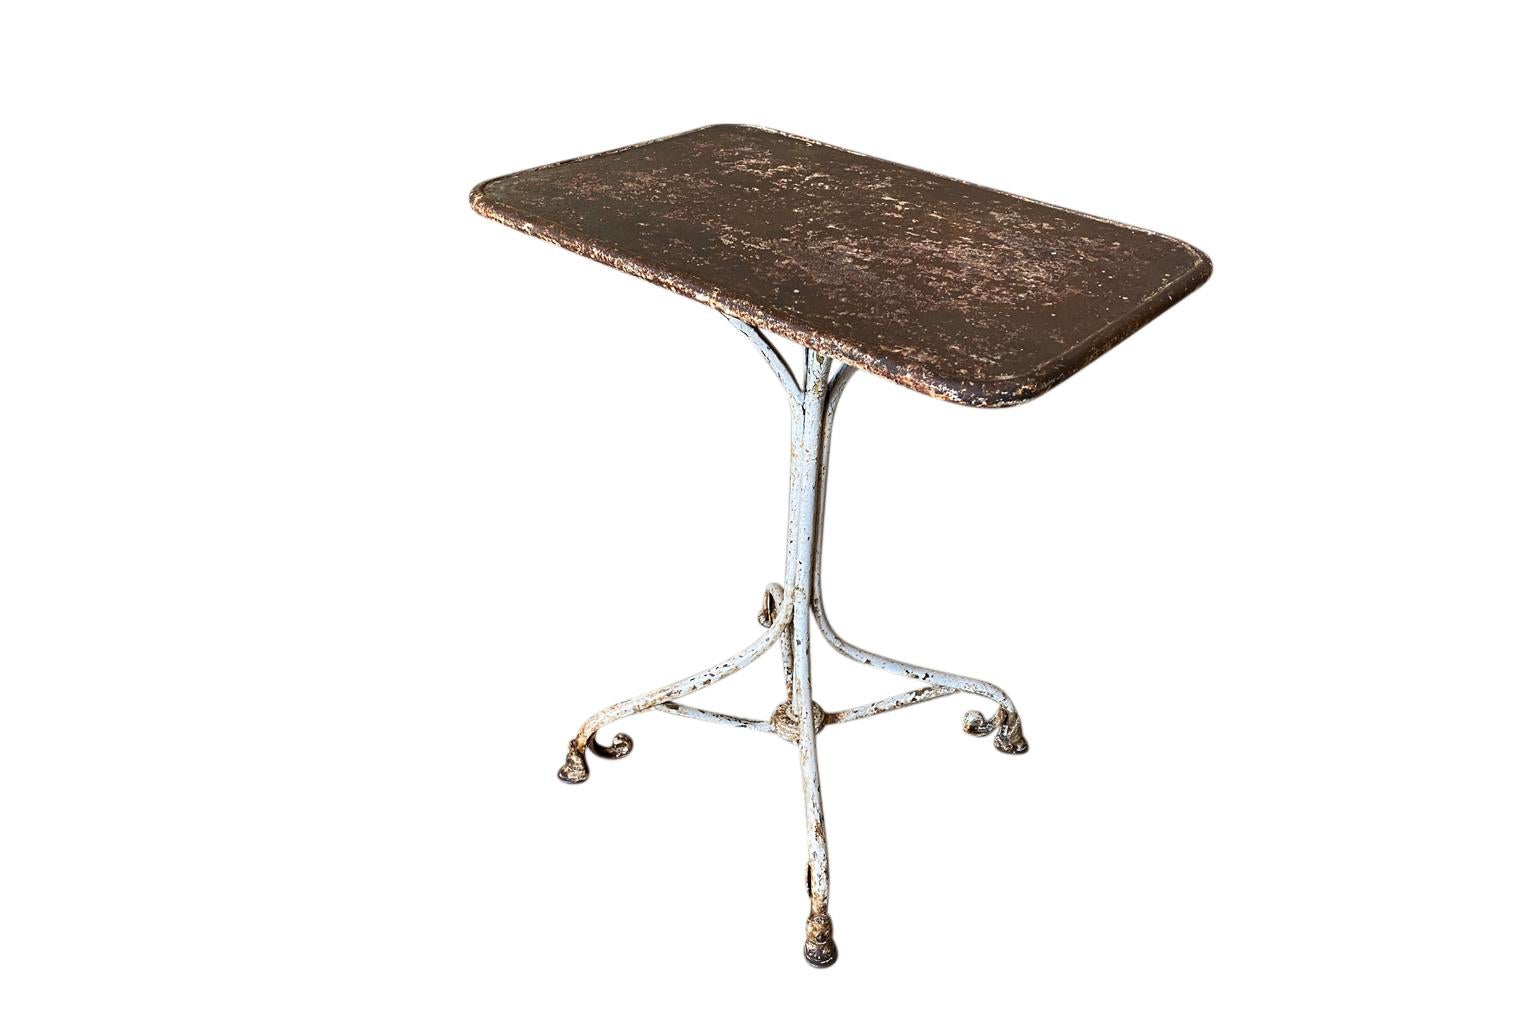 Painted French 19th Century Garden Table From Arras